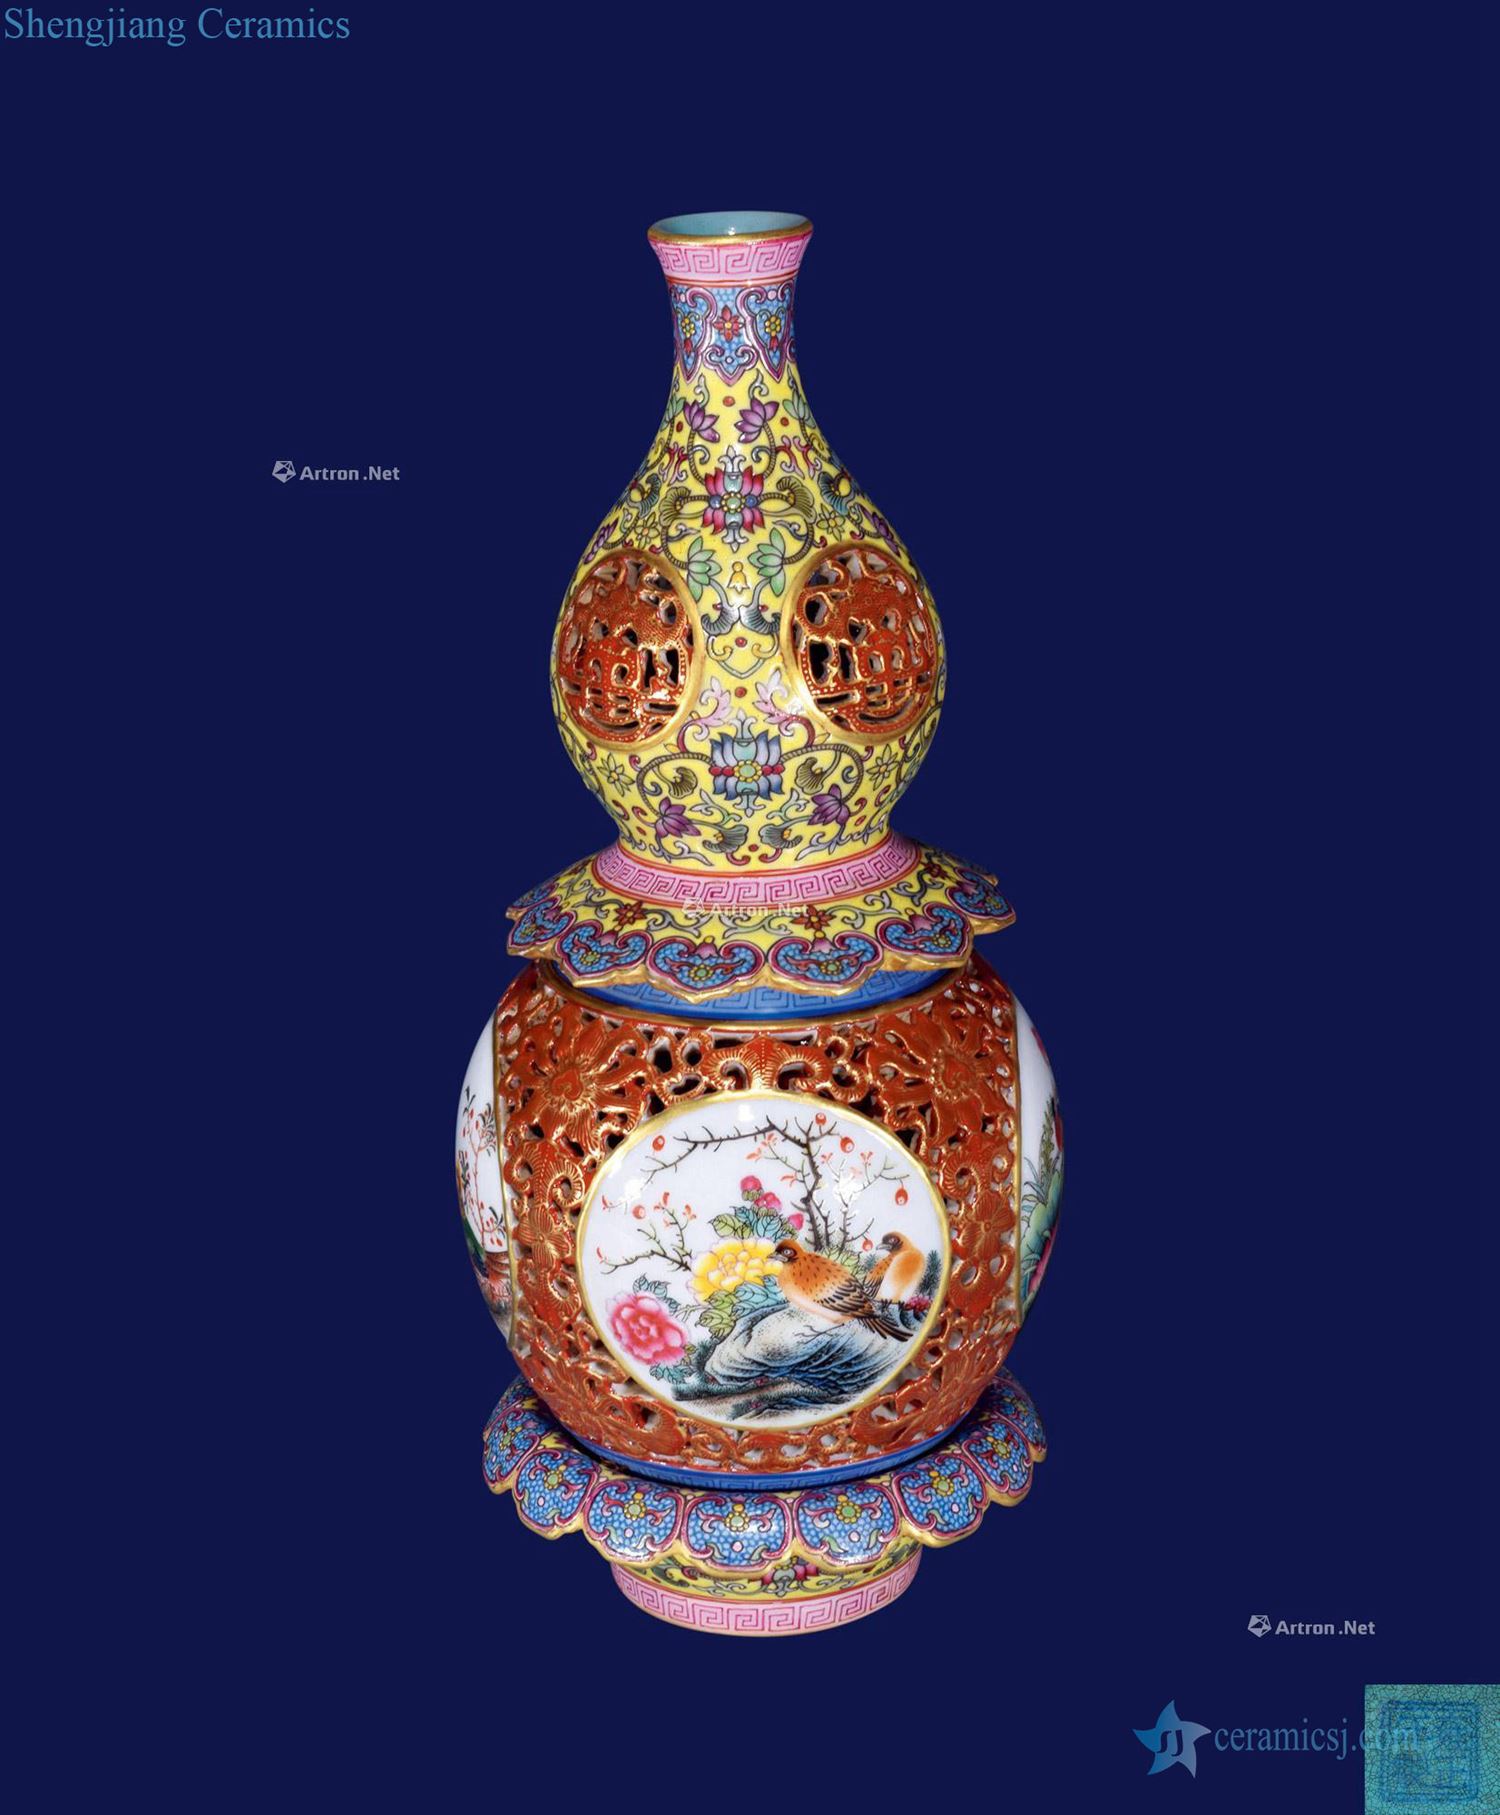 Qing jin to enamel window flower grain hollow-out the gourd bottle which transform the mind